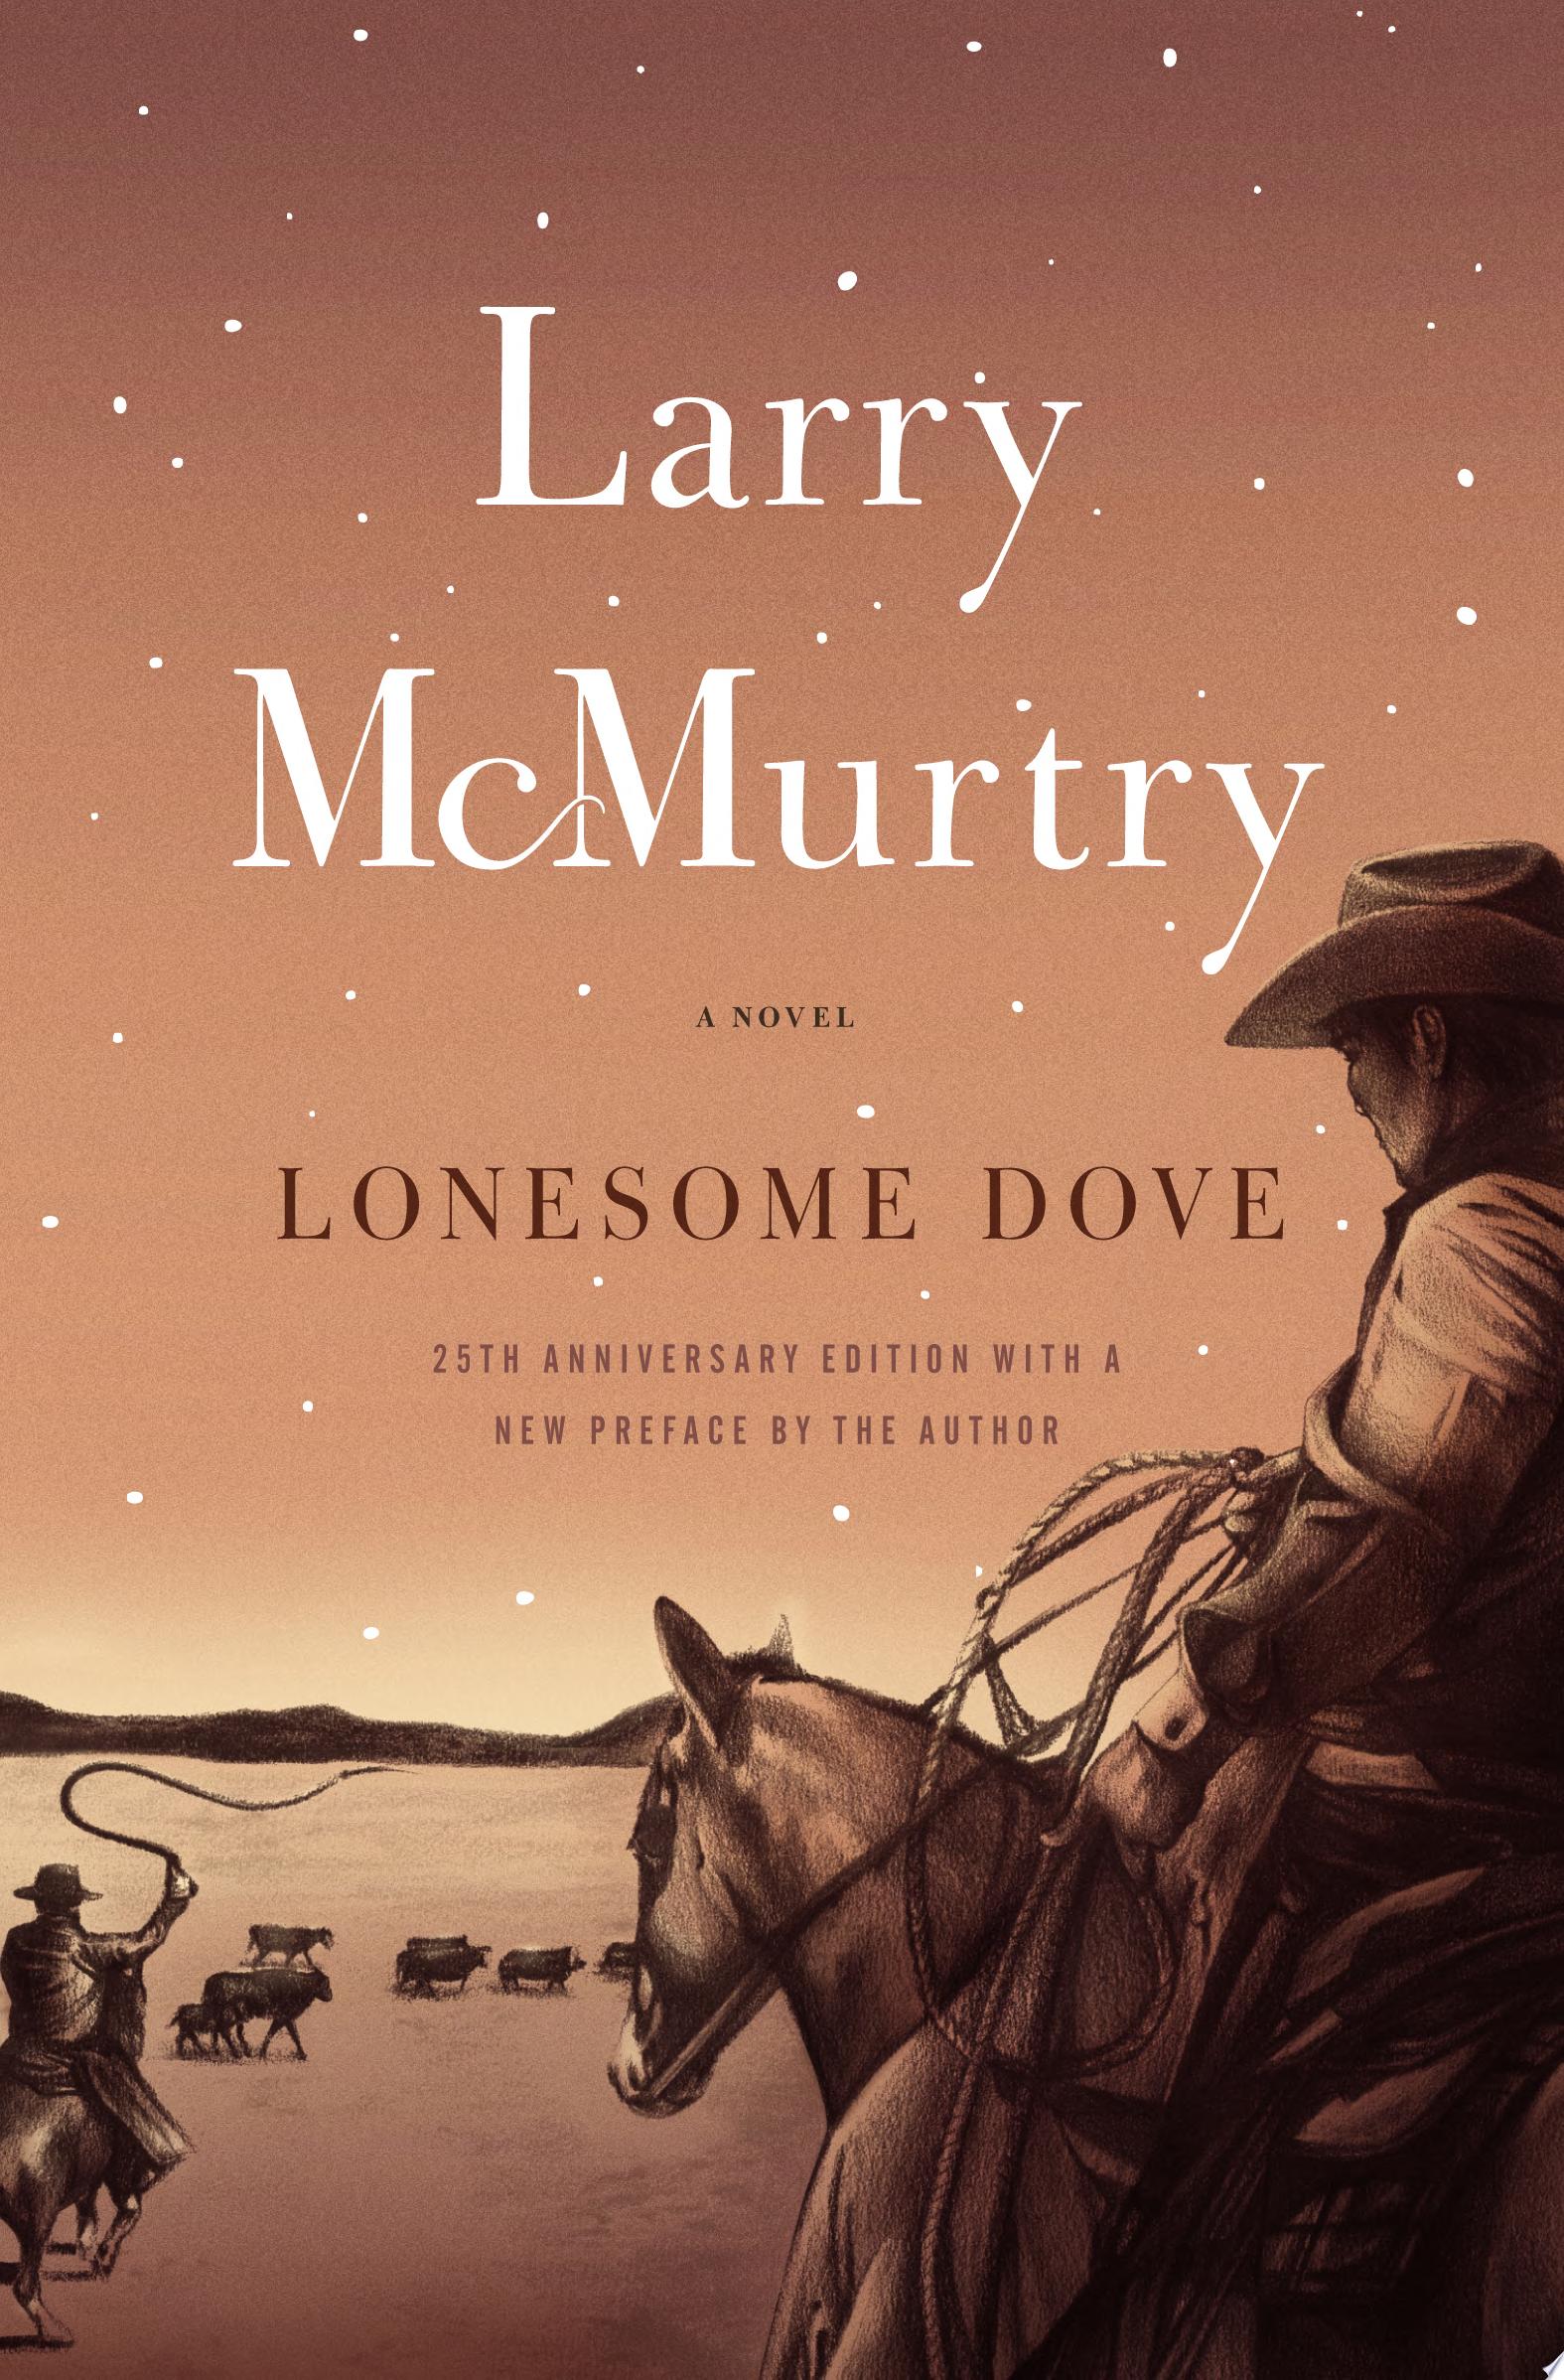 Image for "Lonesome Dove"